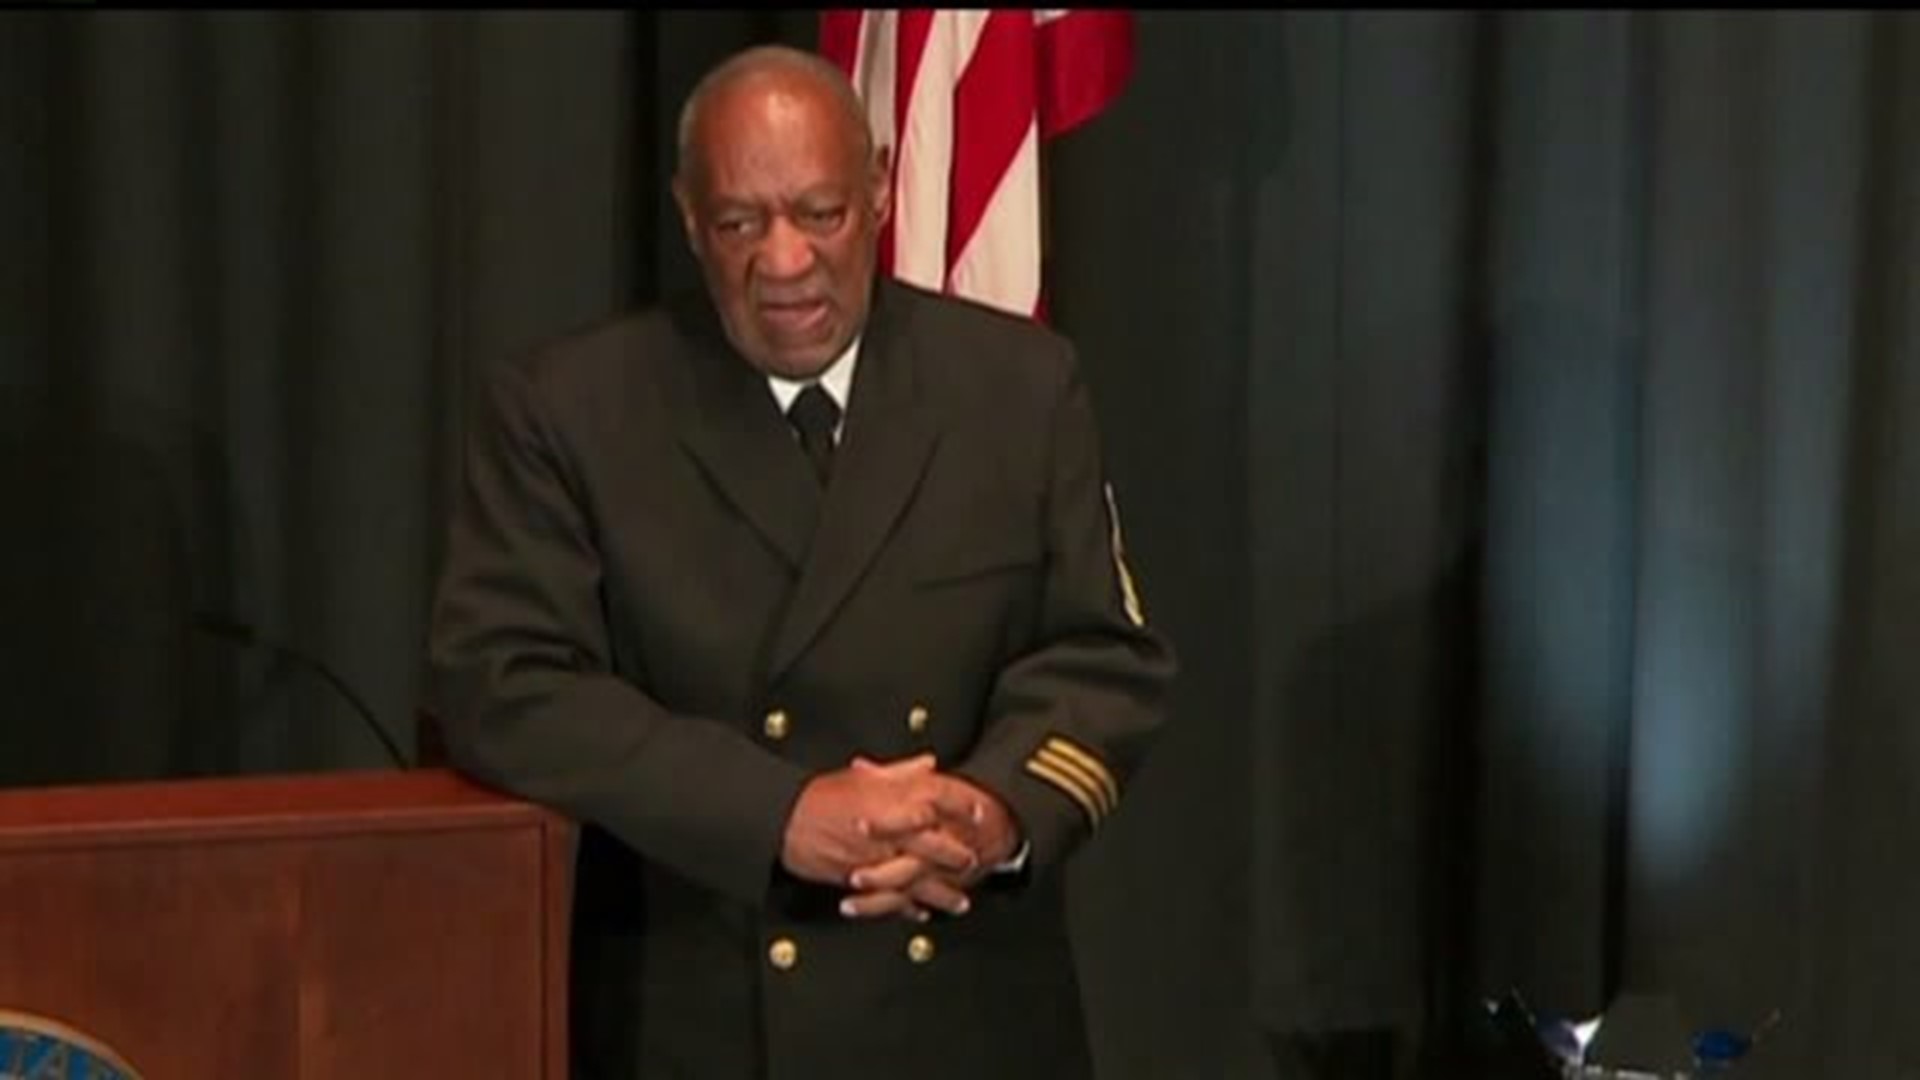 Sexual assault charge filed against Bill Cosby